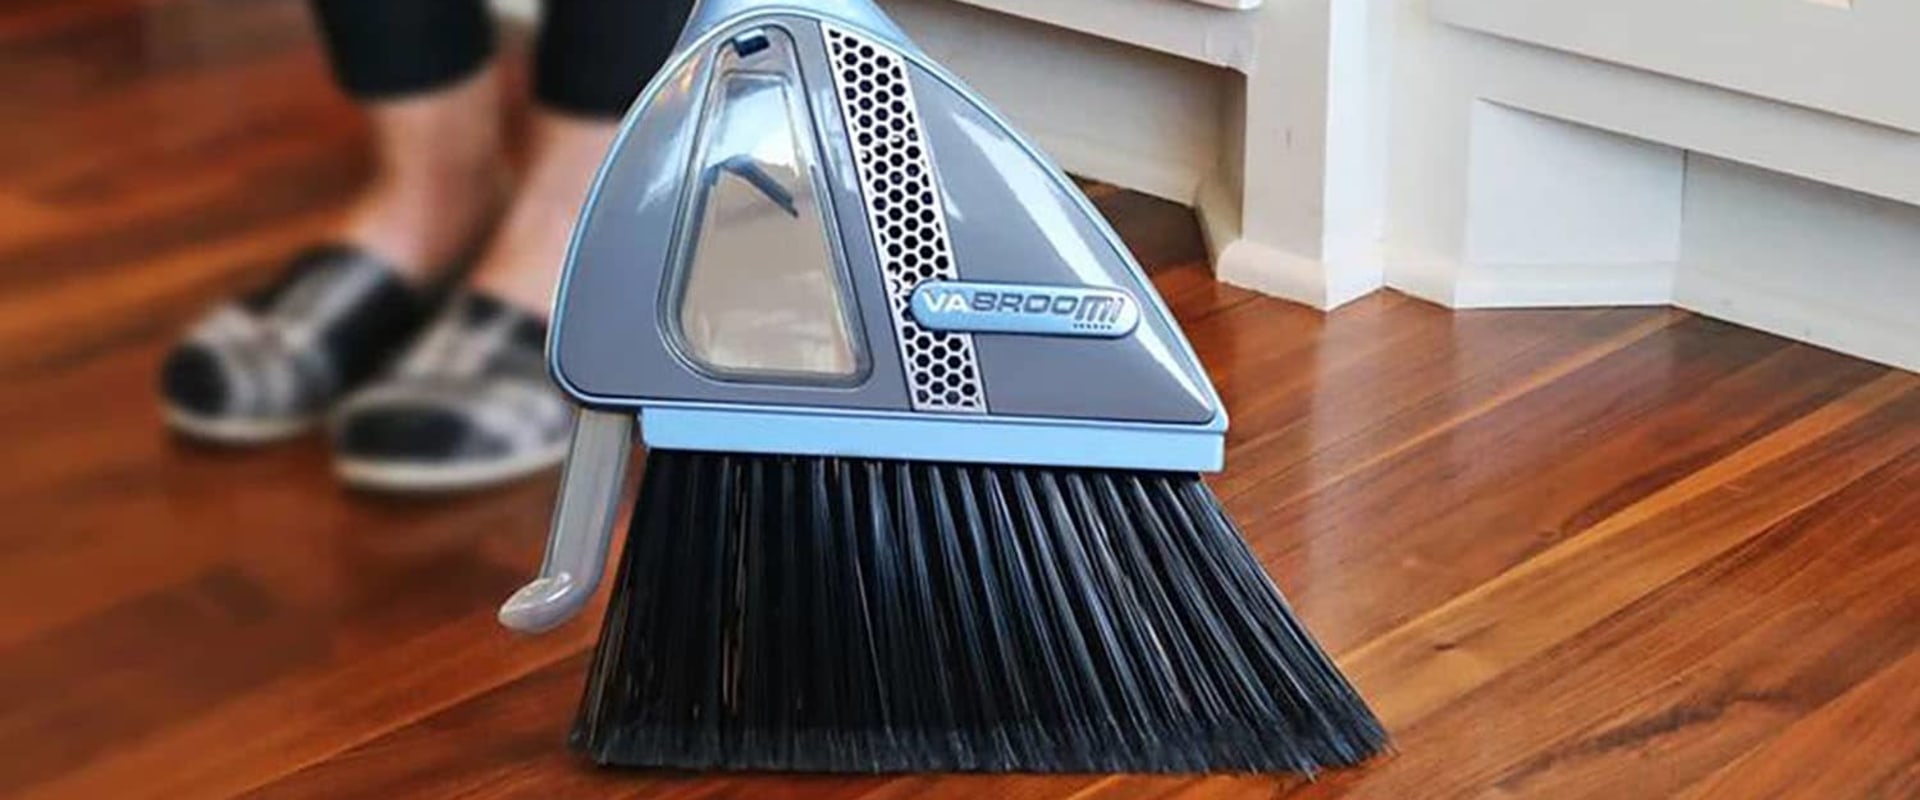 Vacuum Cleaners and Brooms: What You Need to Know